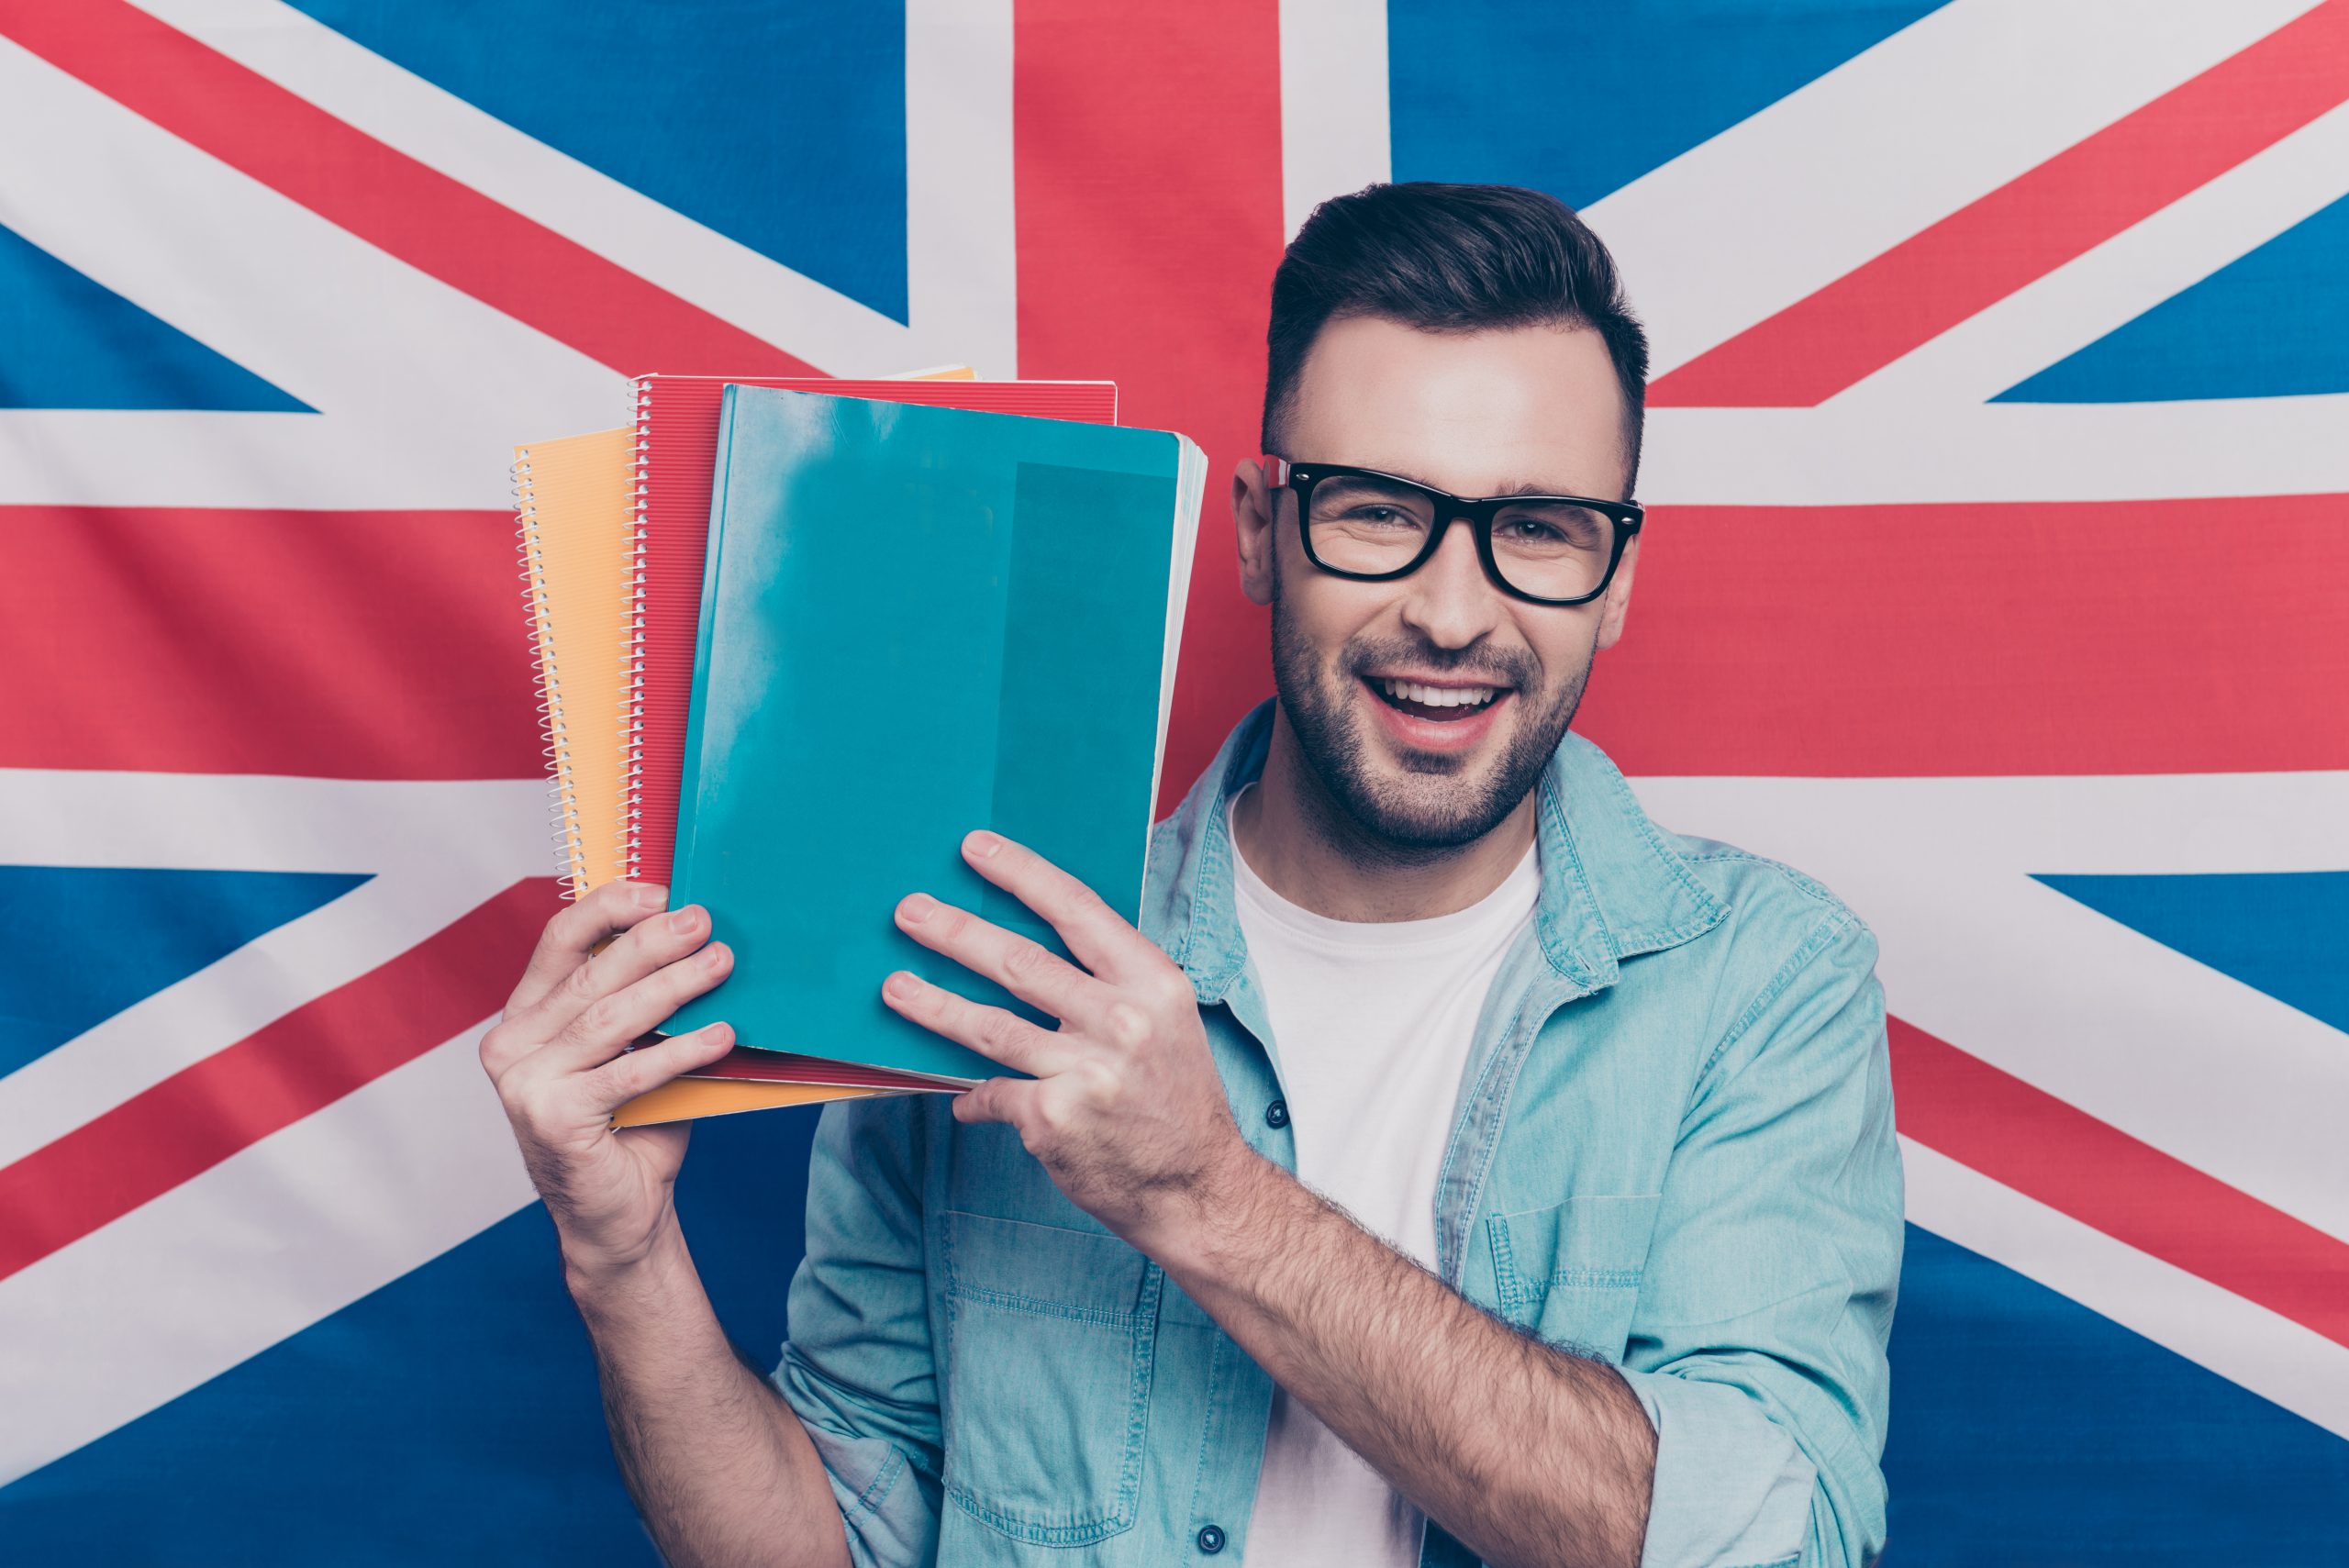 English language learning concept-portrait of cheerful attractive man with bristle showing colorful copy books standing over British flag background